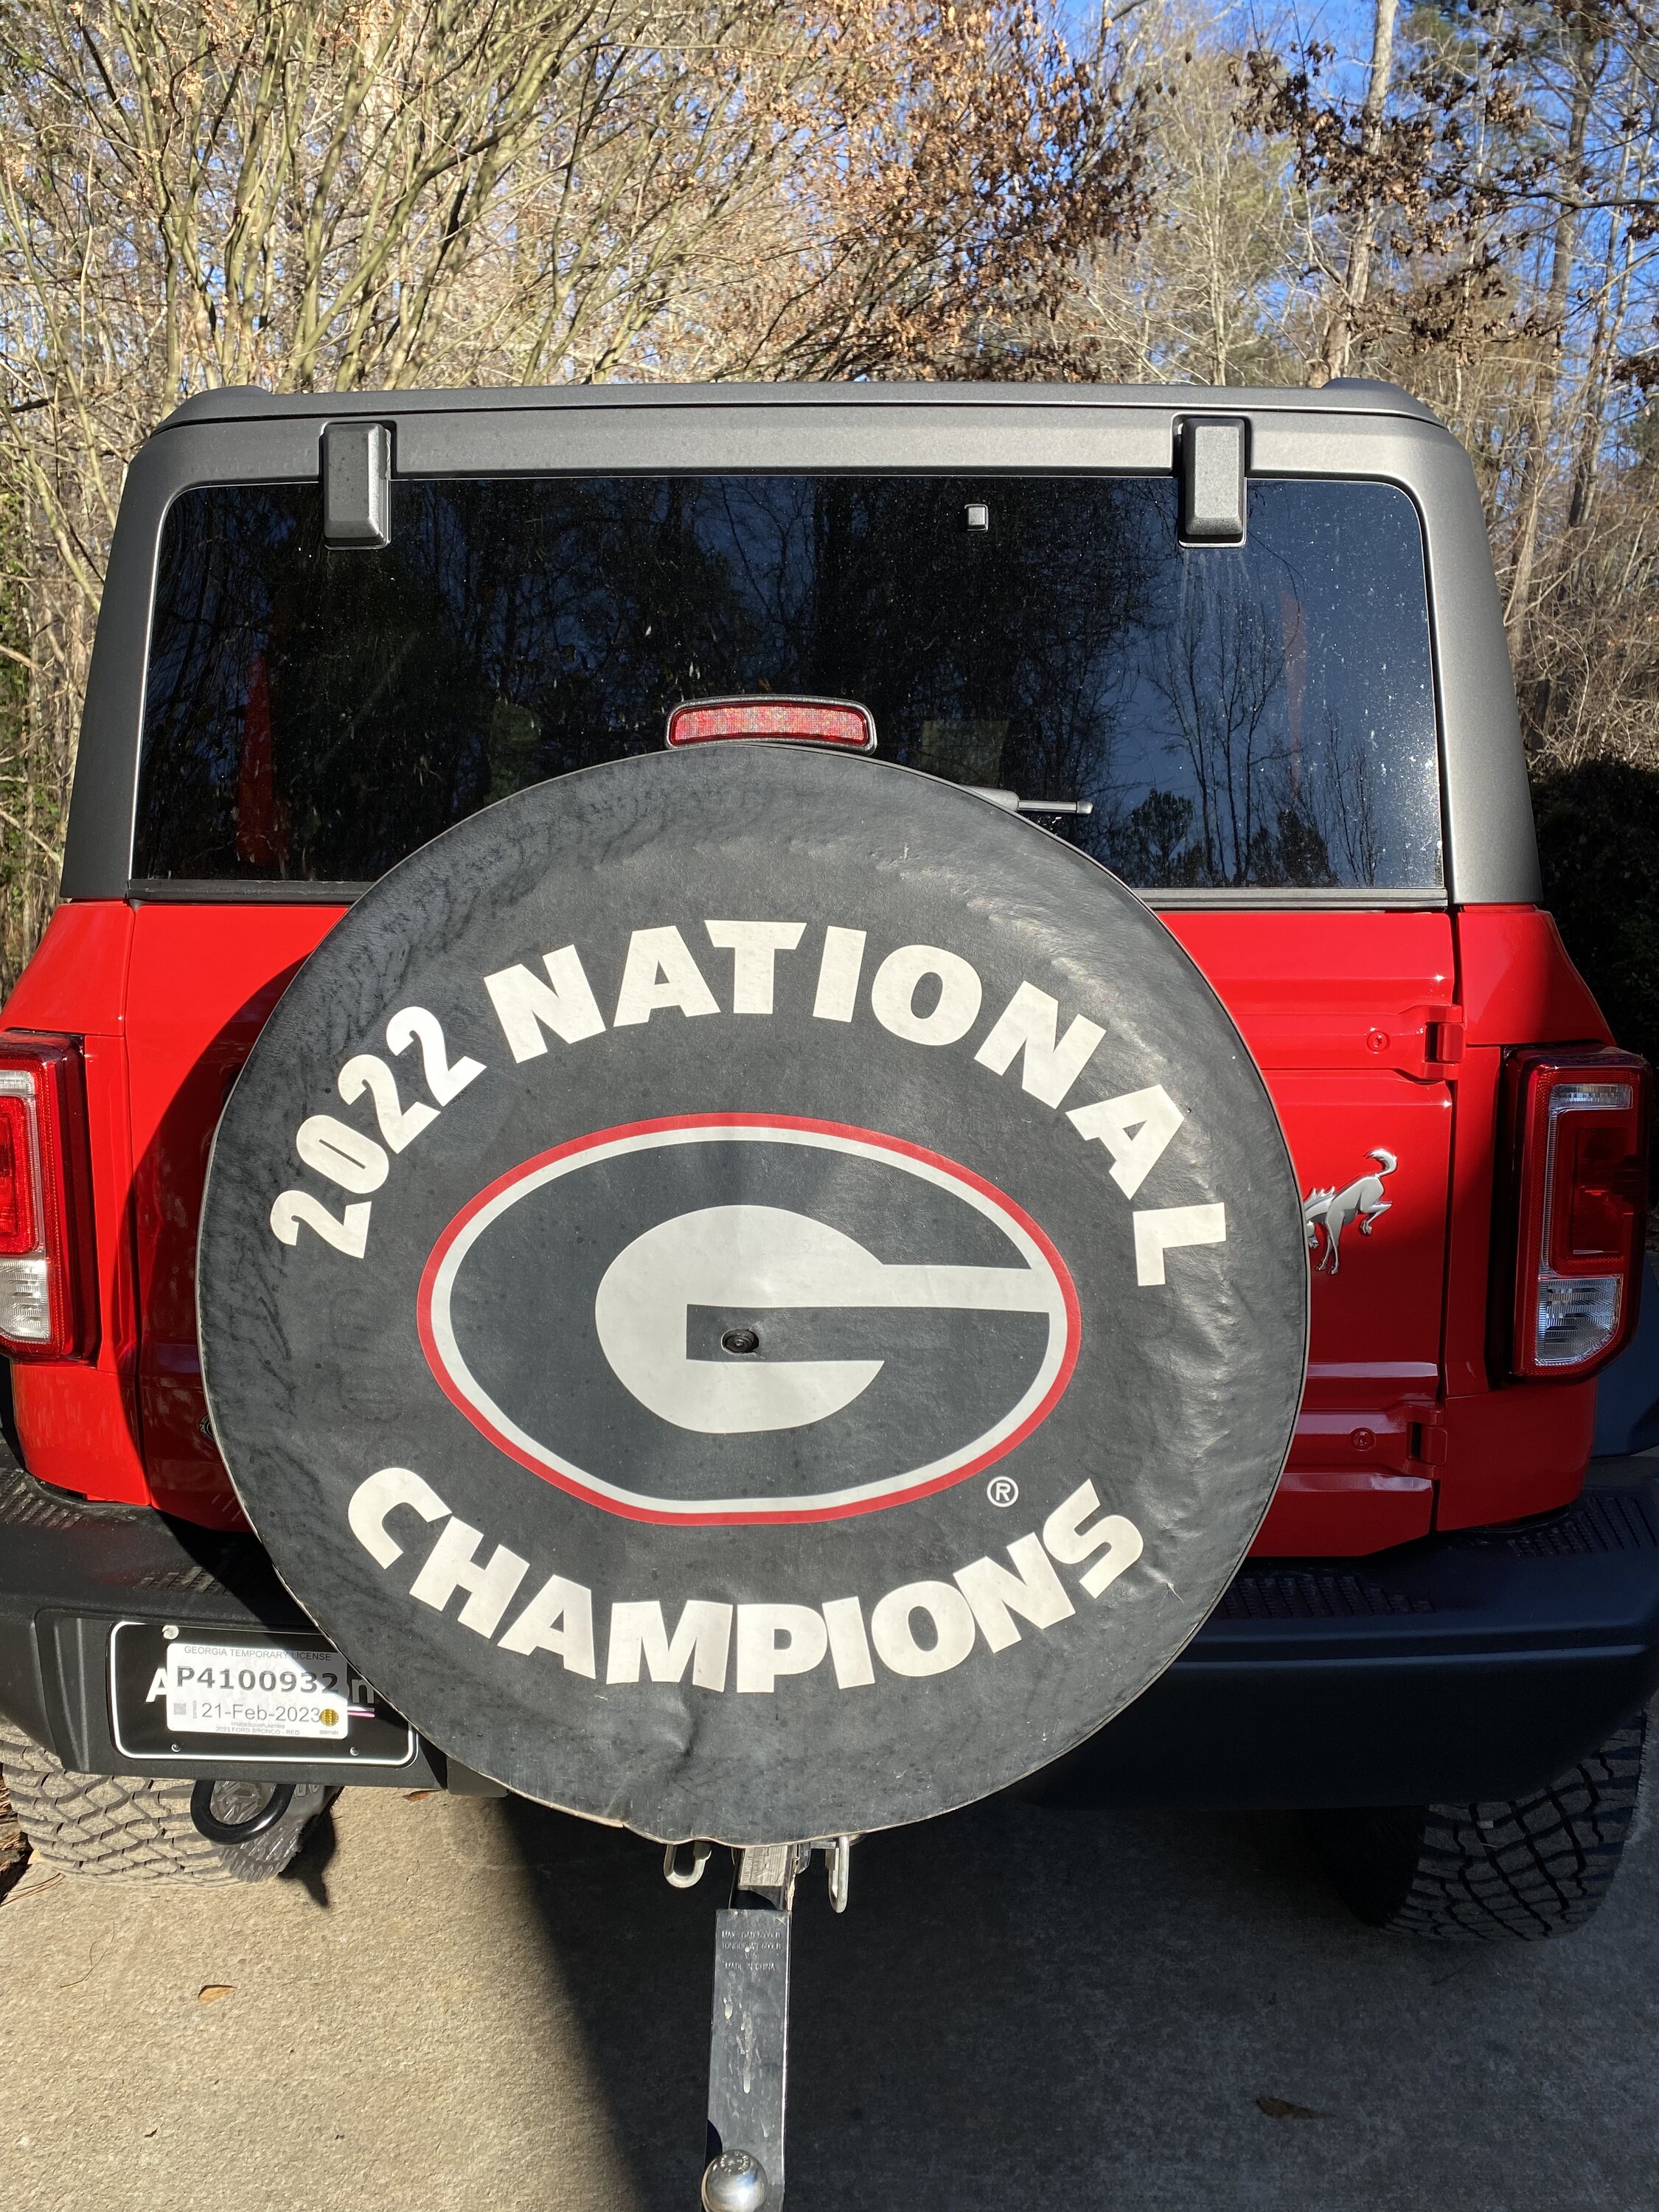 I found an awesome spare tire cover this morning | Bronco6G - 2021+ Ford  Bronco & Bronco Raptor Forum, News, Blog & Owners Community